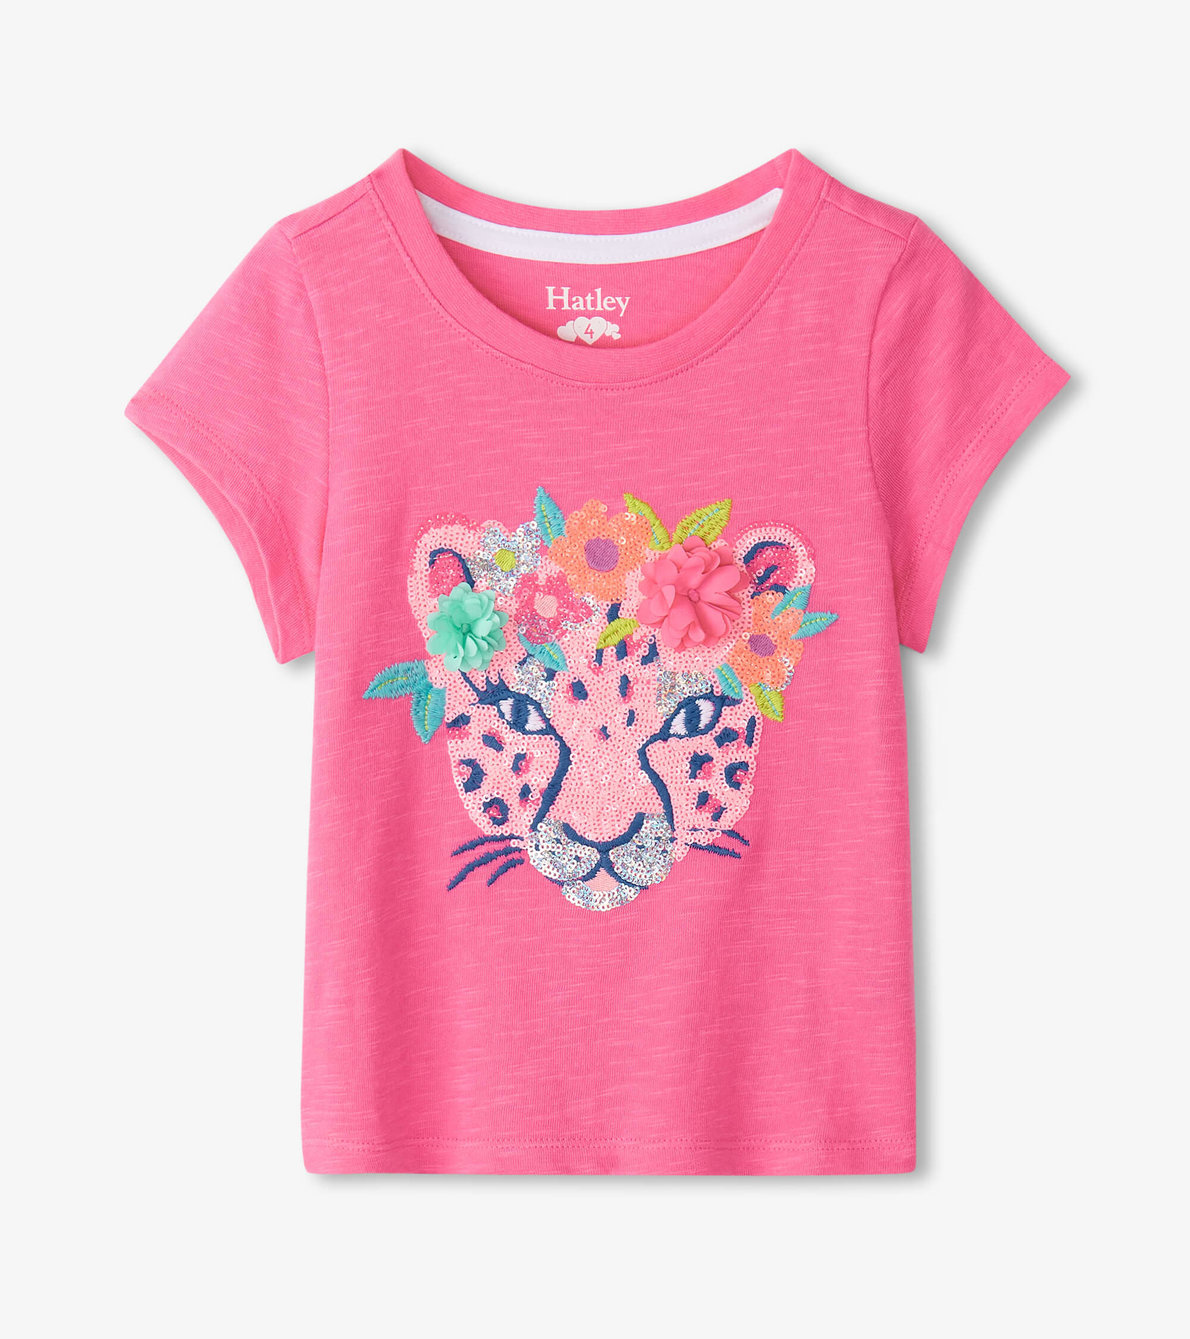 View larger image of Girls Pretty Cheetah Graphic Tee